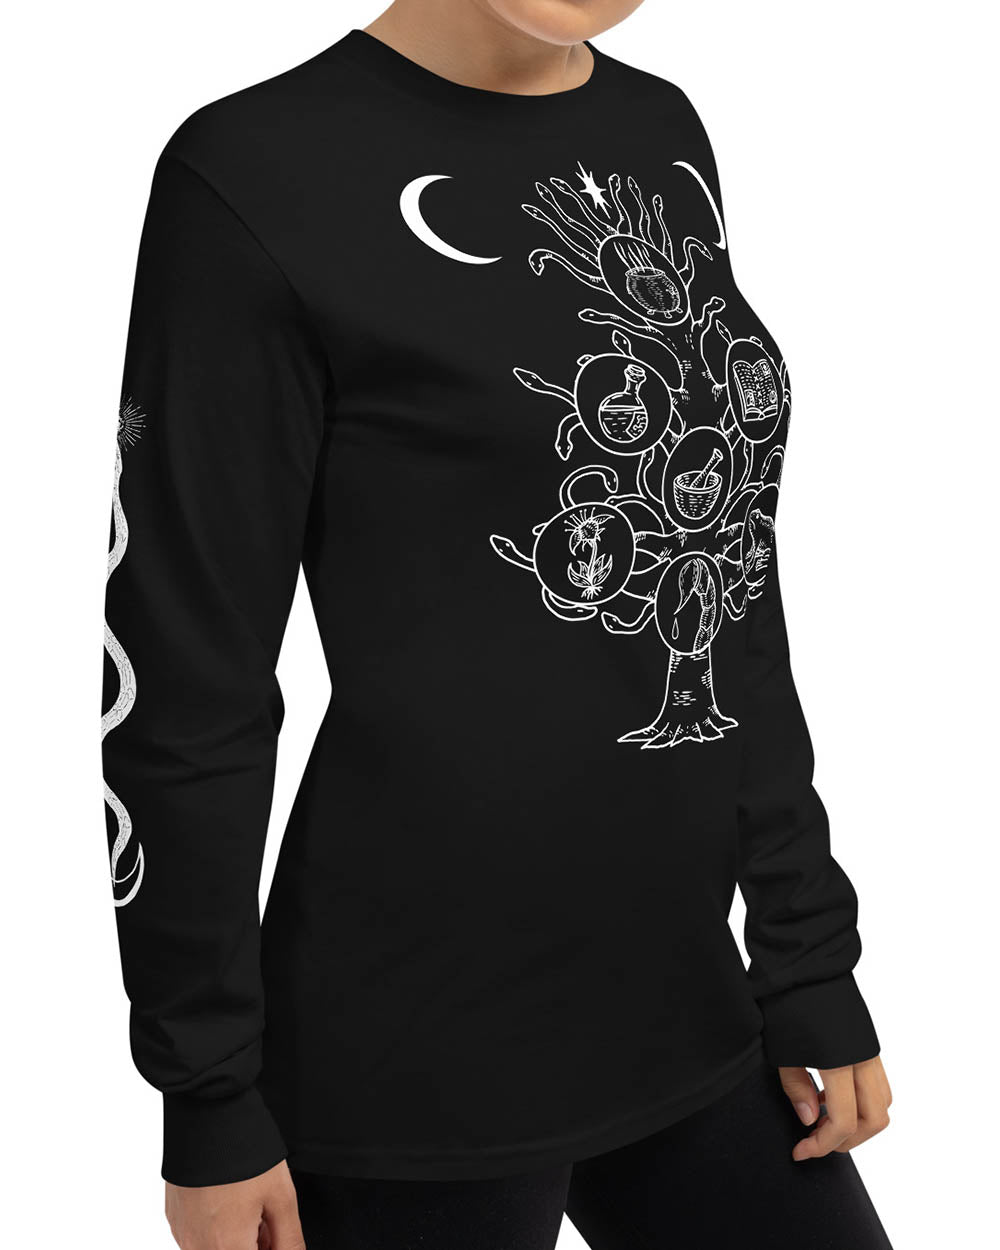 Tree of Life Long Sleeve Tee - Alt Goth Witchy Alt Style Dark Academia Pagan & Occult Secrets Graphic Gothic